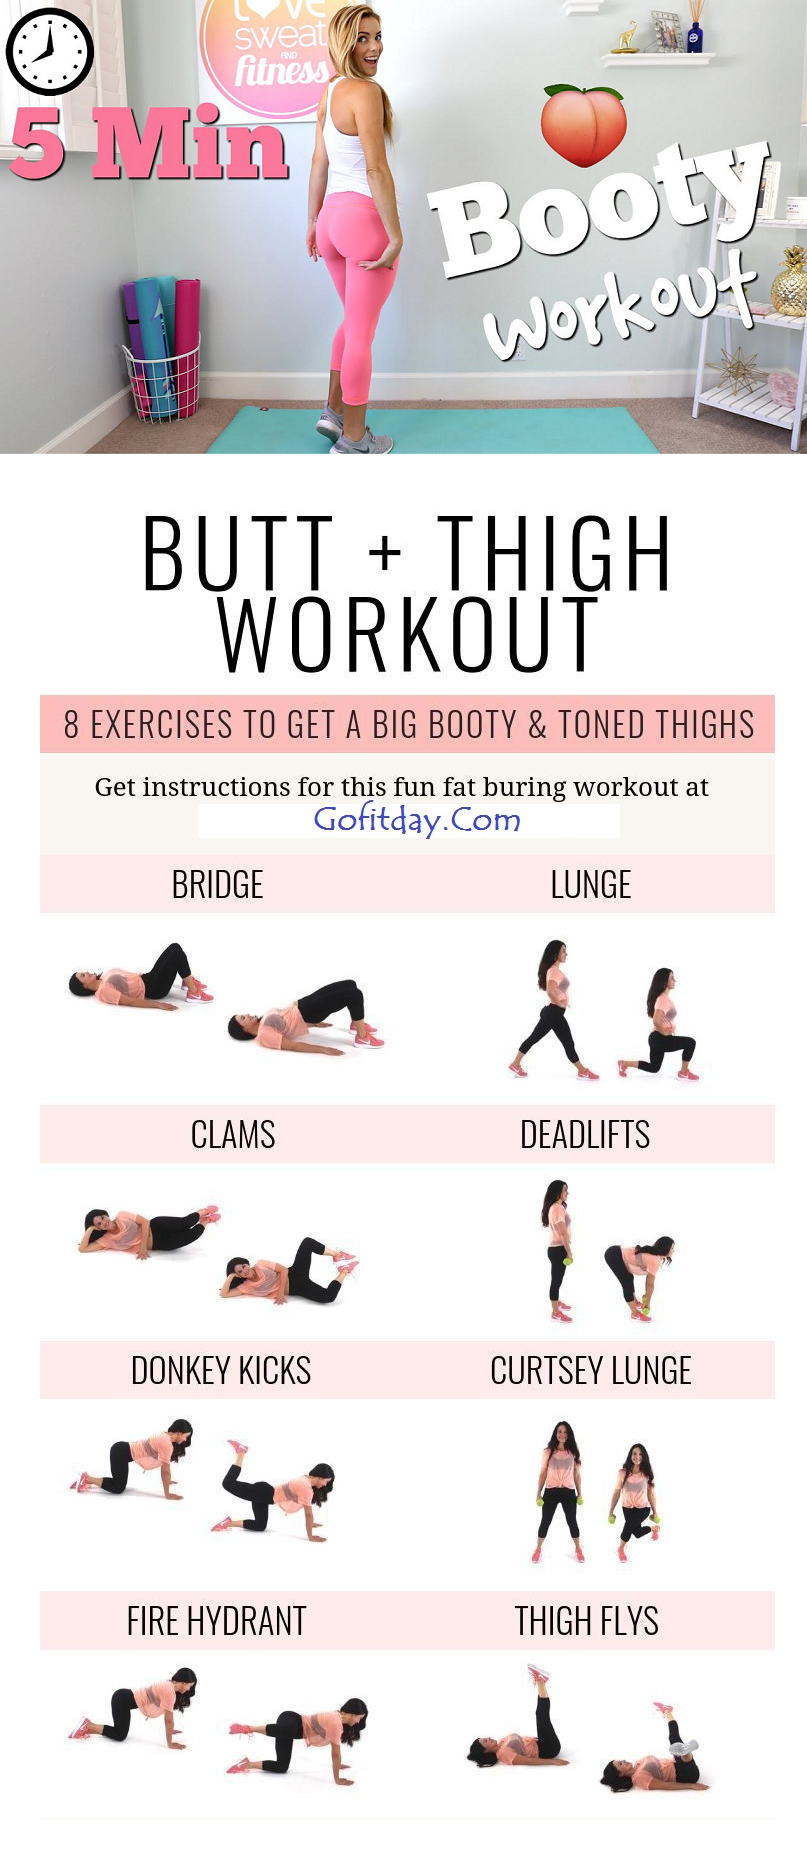 butt tightening exercises -   24 workouts at home butt ideas